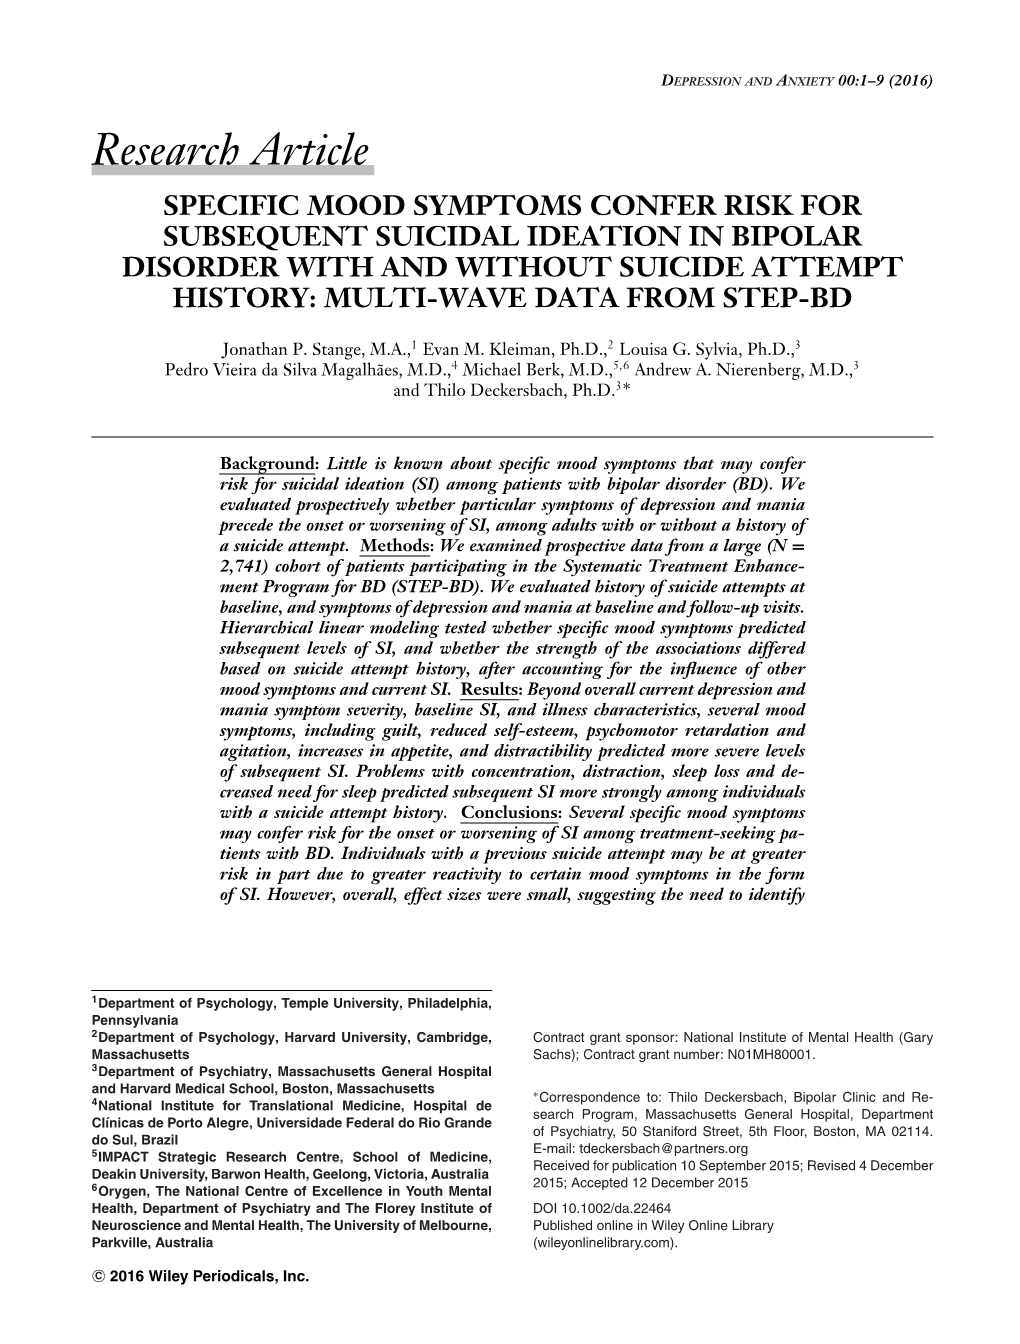 Specific Mood Symptoms Confer Risk for Subsequent Suicidal Ideation in Bipolar Disorder with and Without Suicide Attempt History: Multi-Wave Data from Step-Bd